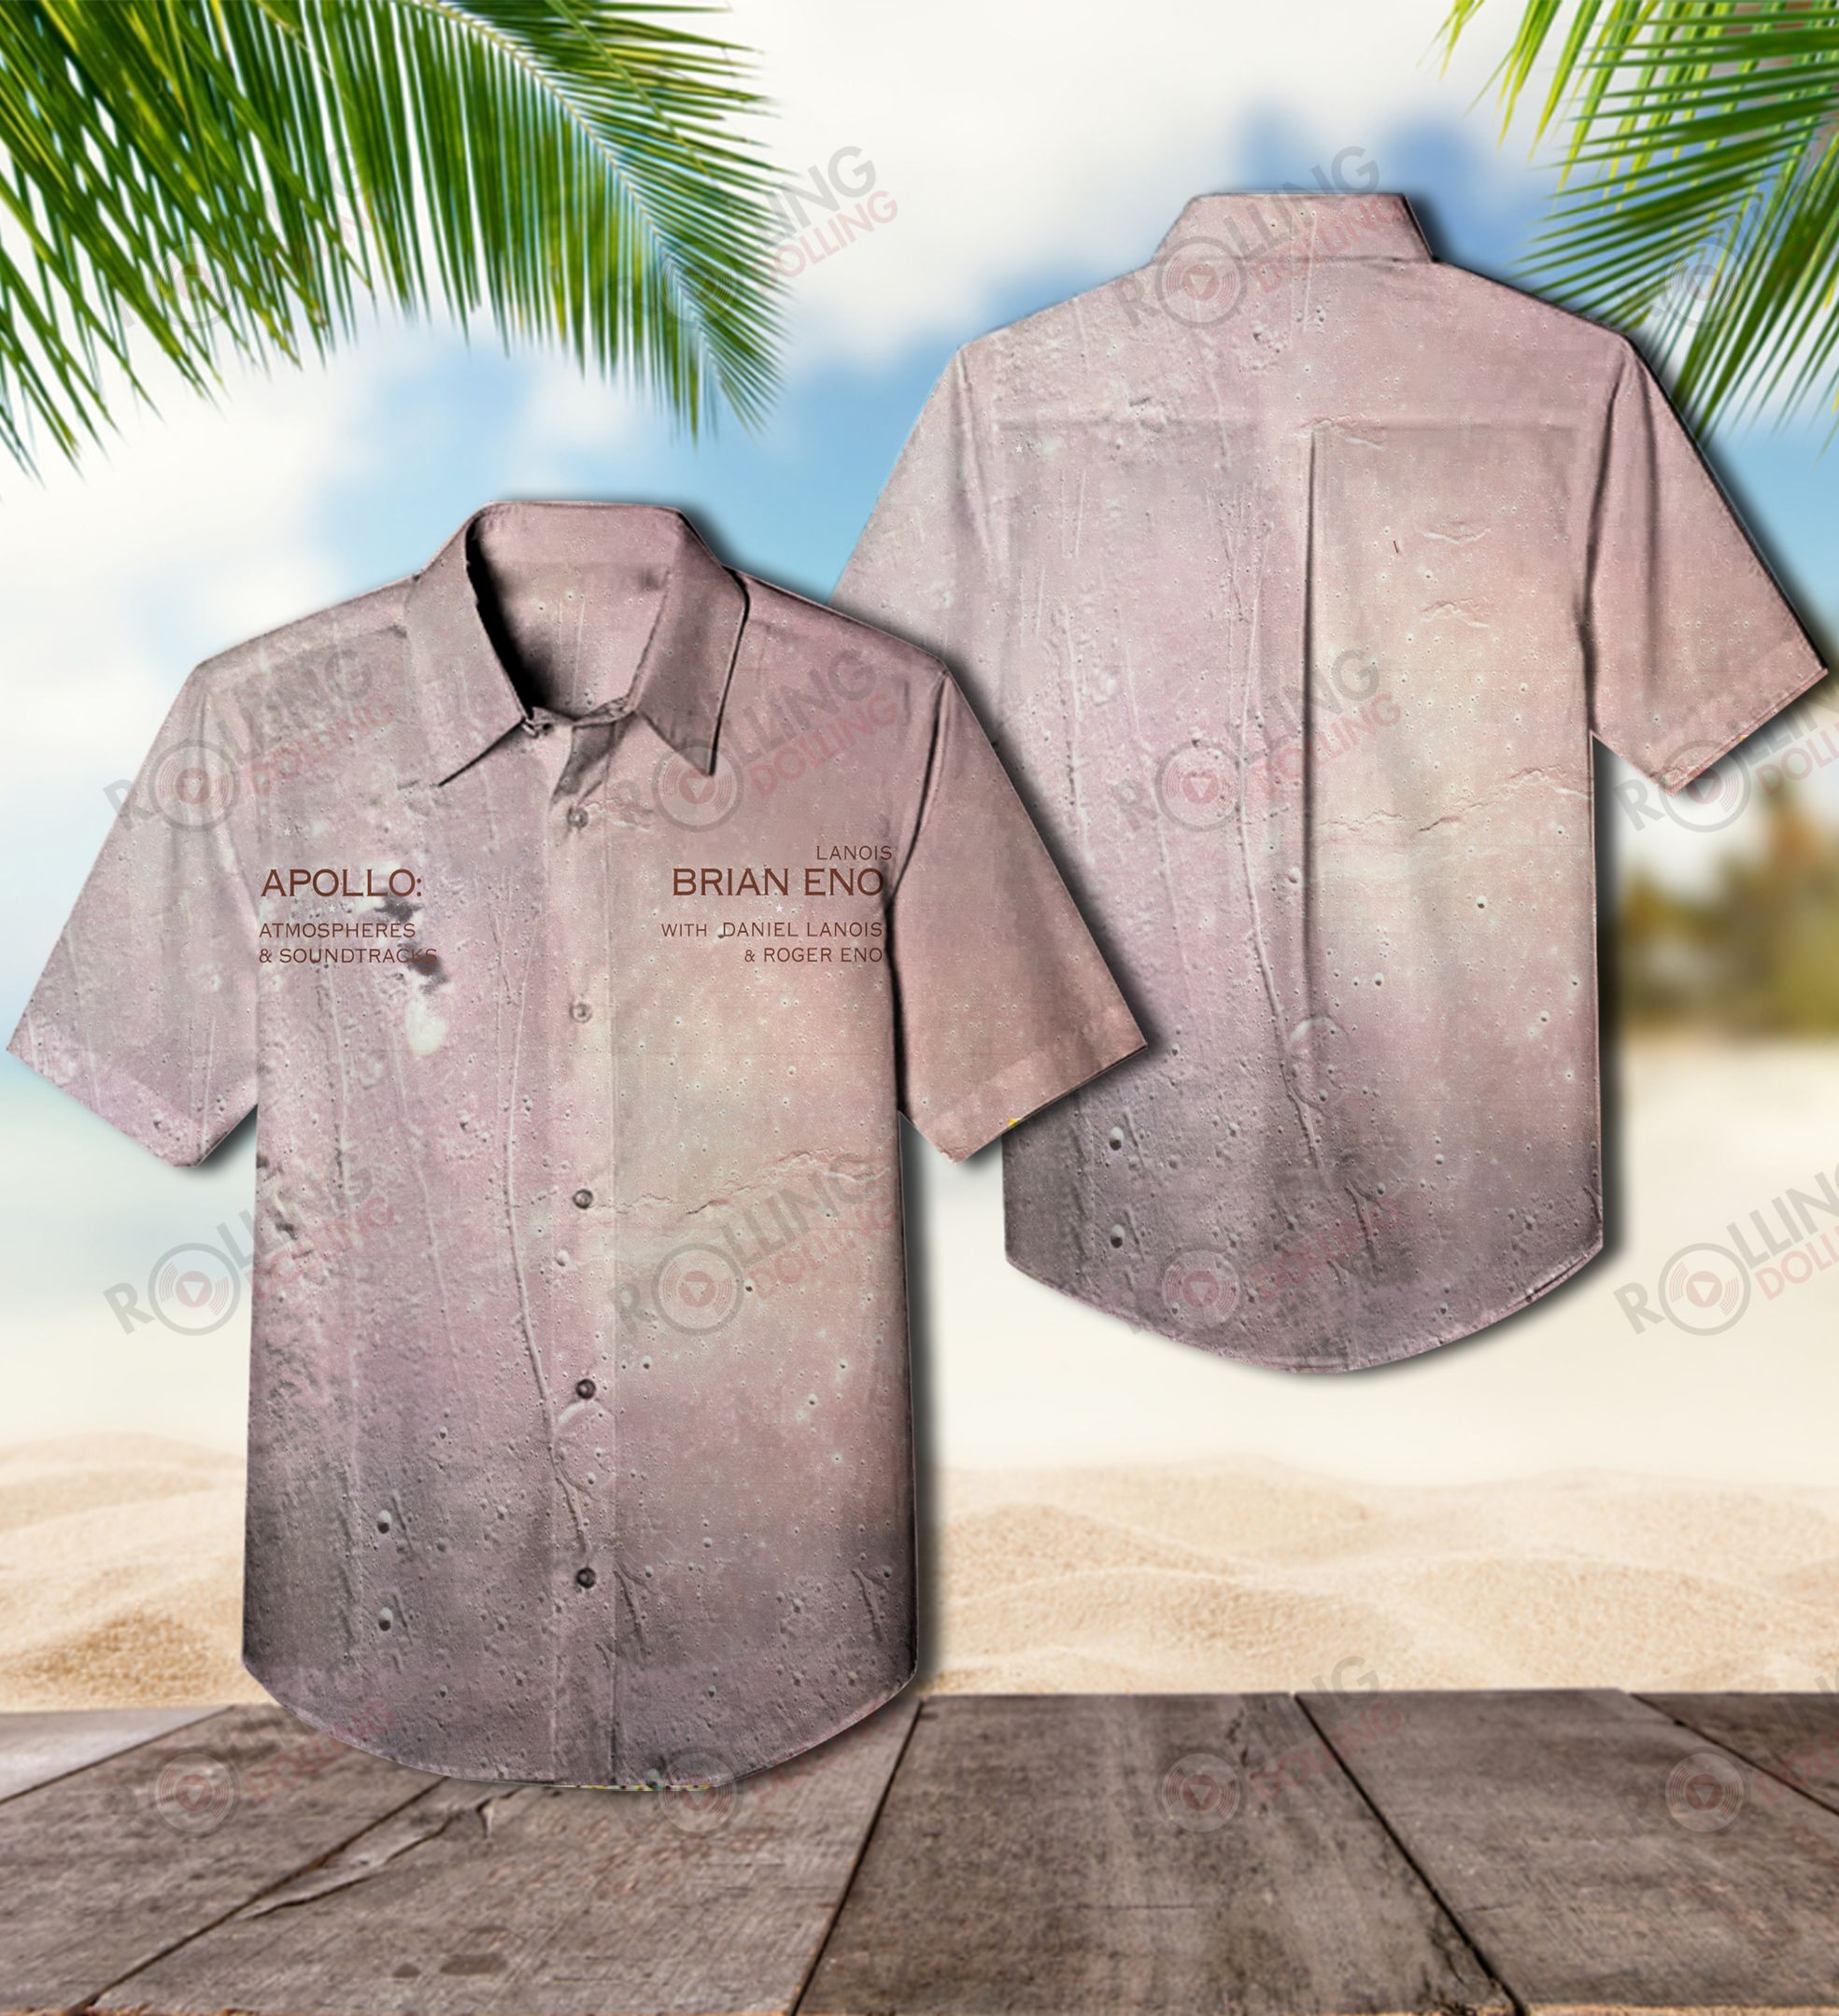 You'll have the perfect vacation outfit with this Hawaiian shirt 305